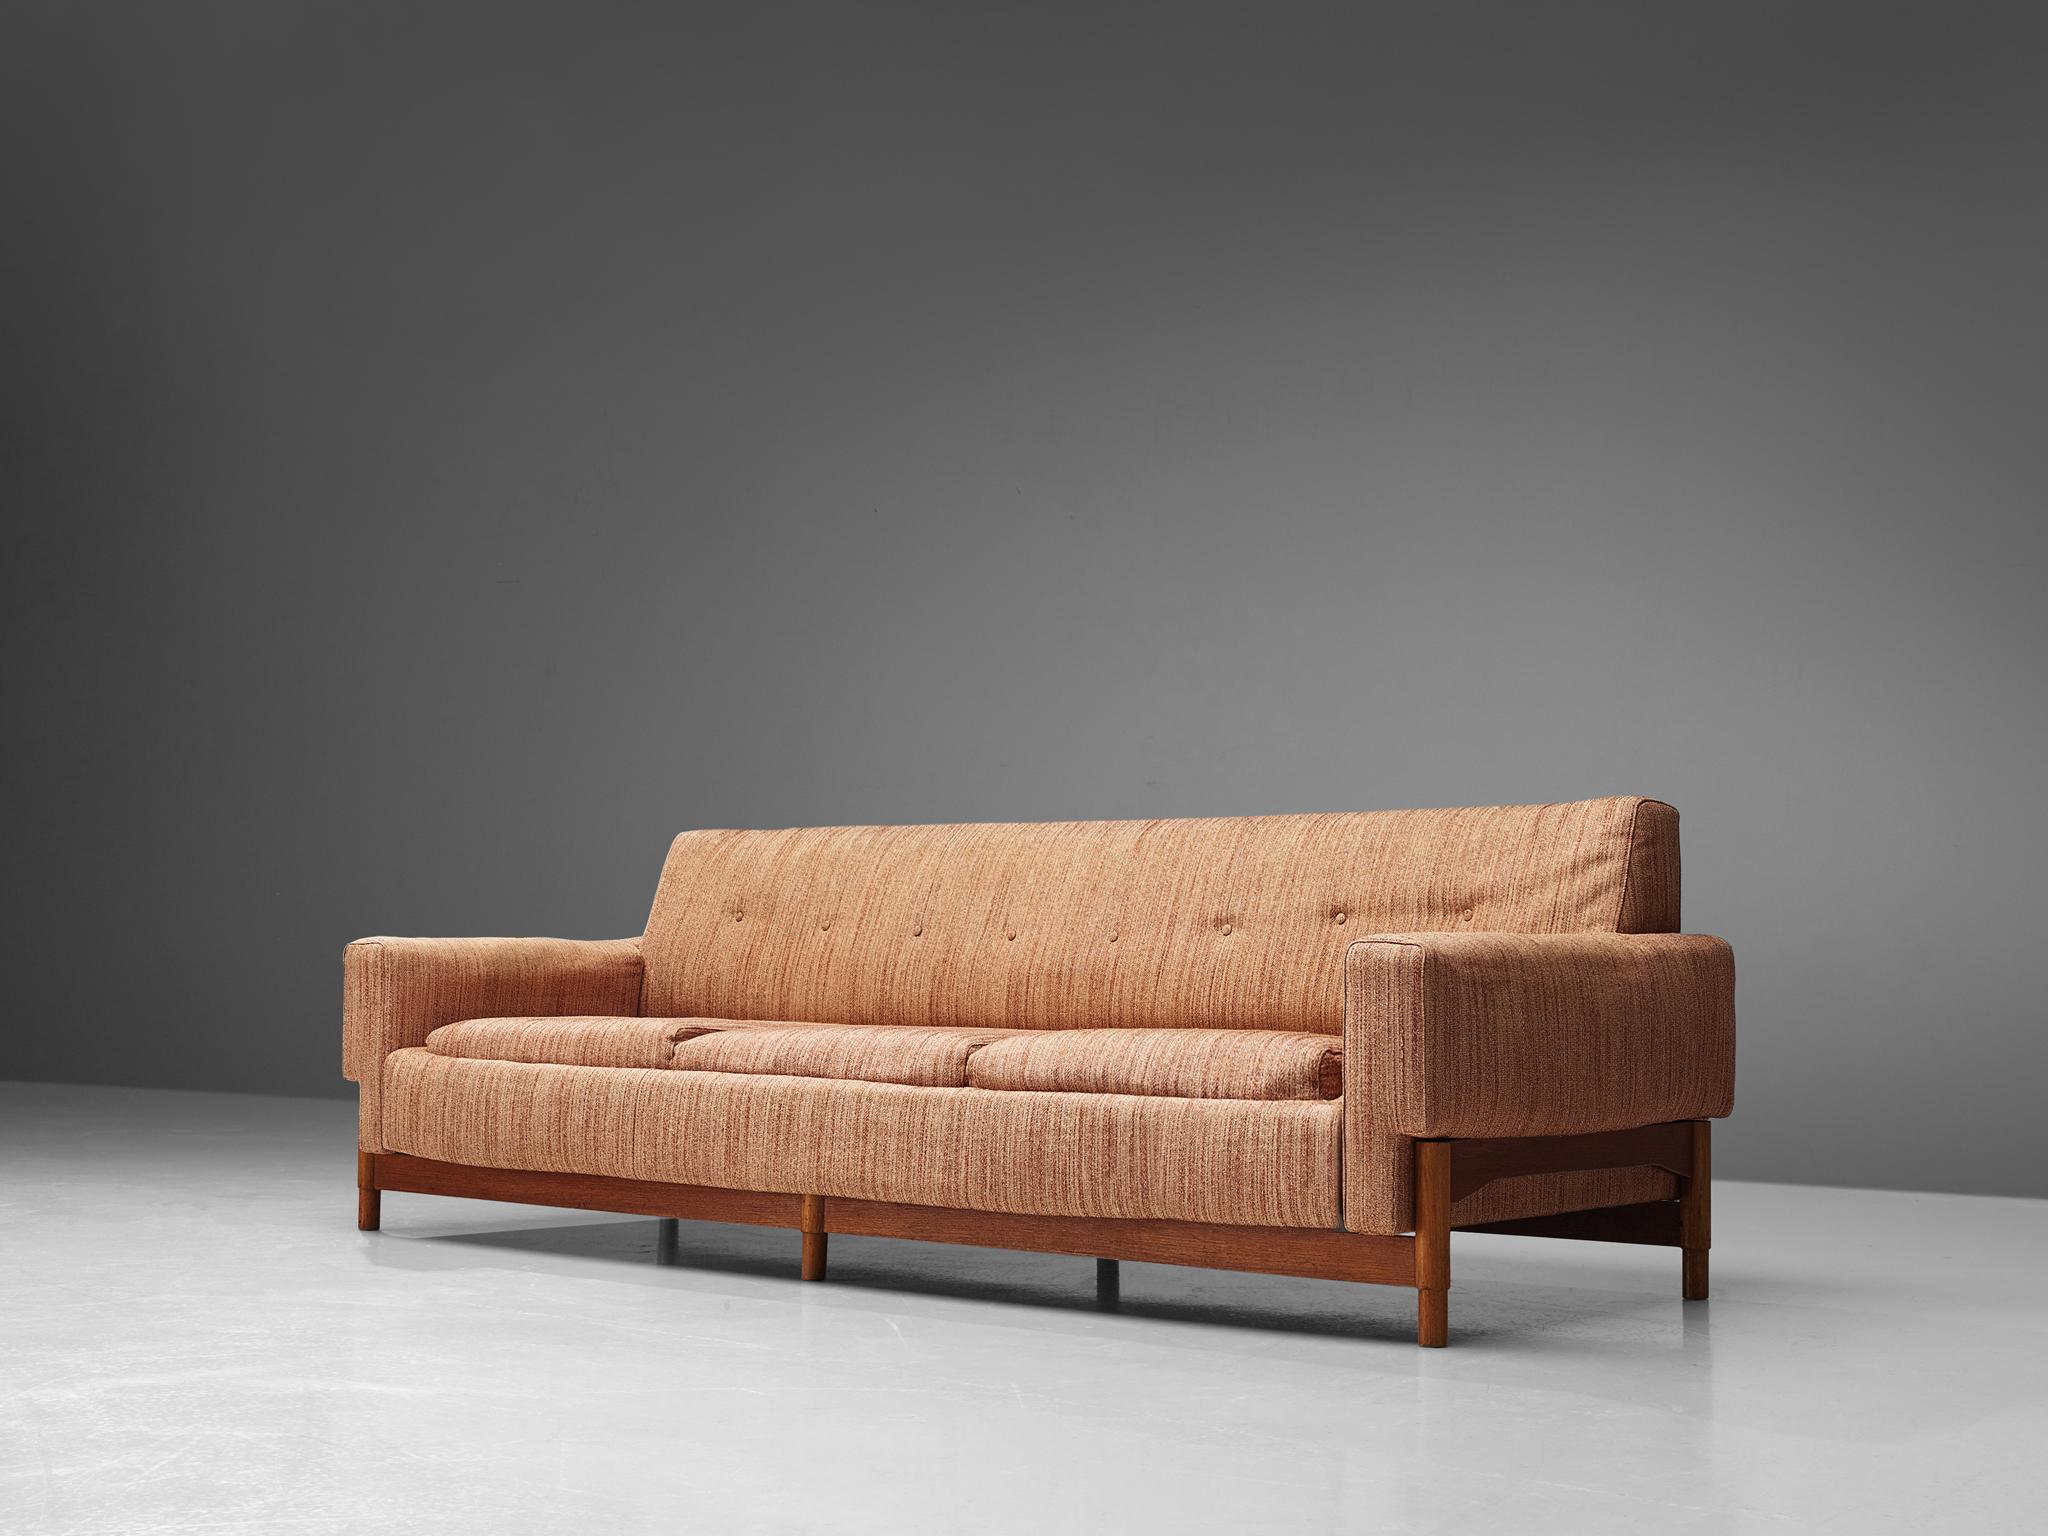 Saporiti, sofa in teak and fabric, Italy, 1960s.

This sofa features a teak frame and a retro salmon colored upholstery. The sofa is designed in a modest, yet distinguished look. The sofa features a balanced aesthetic thanks to the combination of